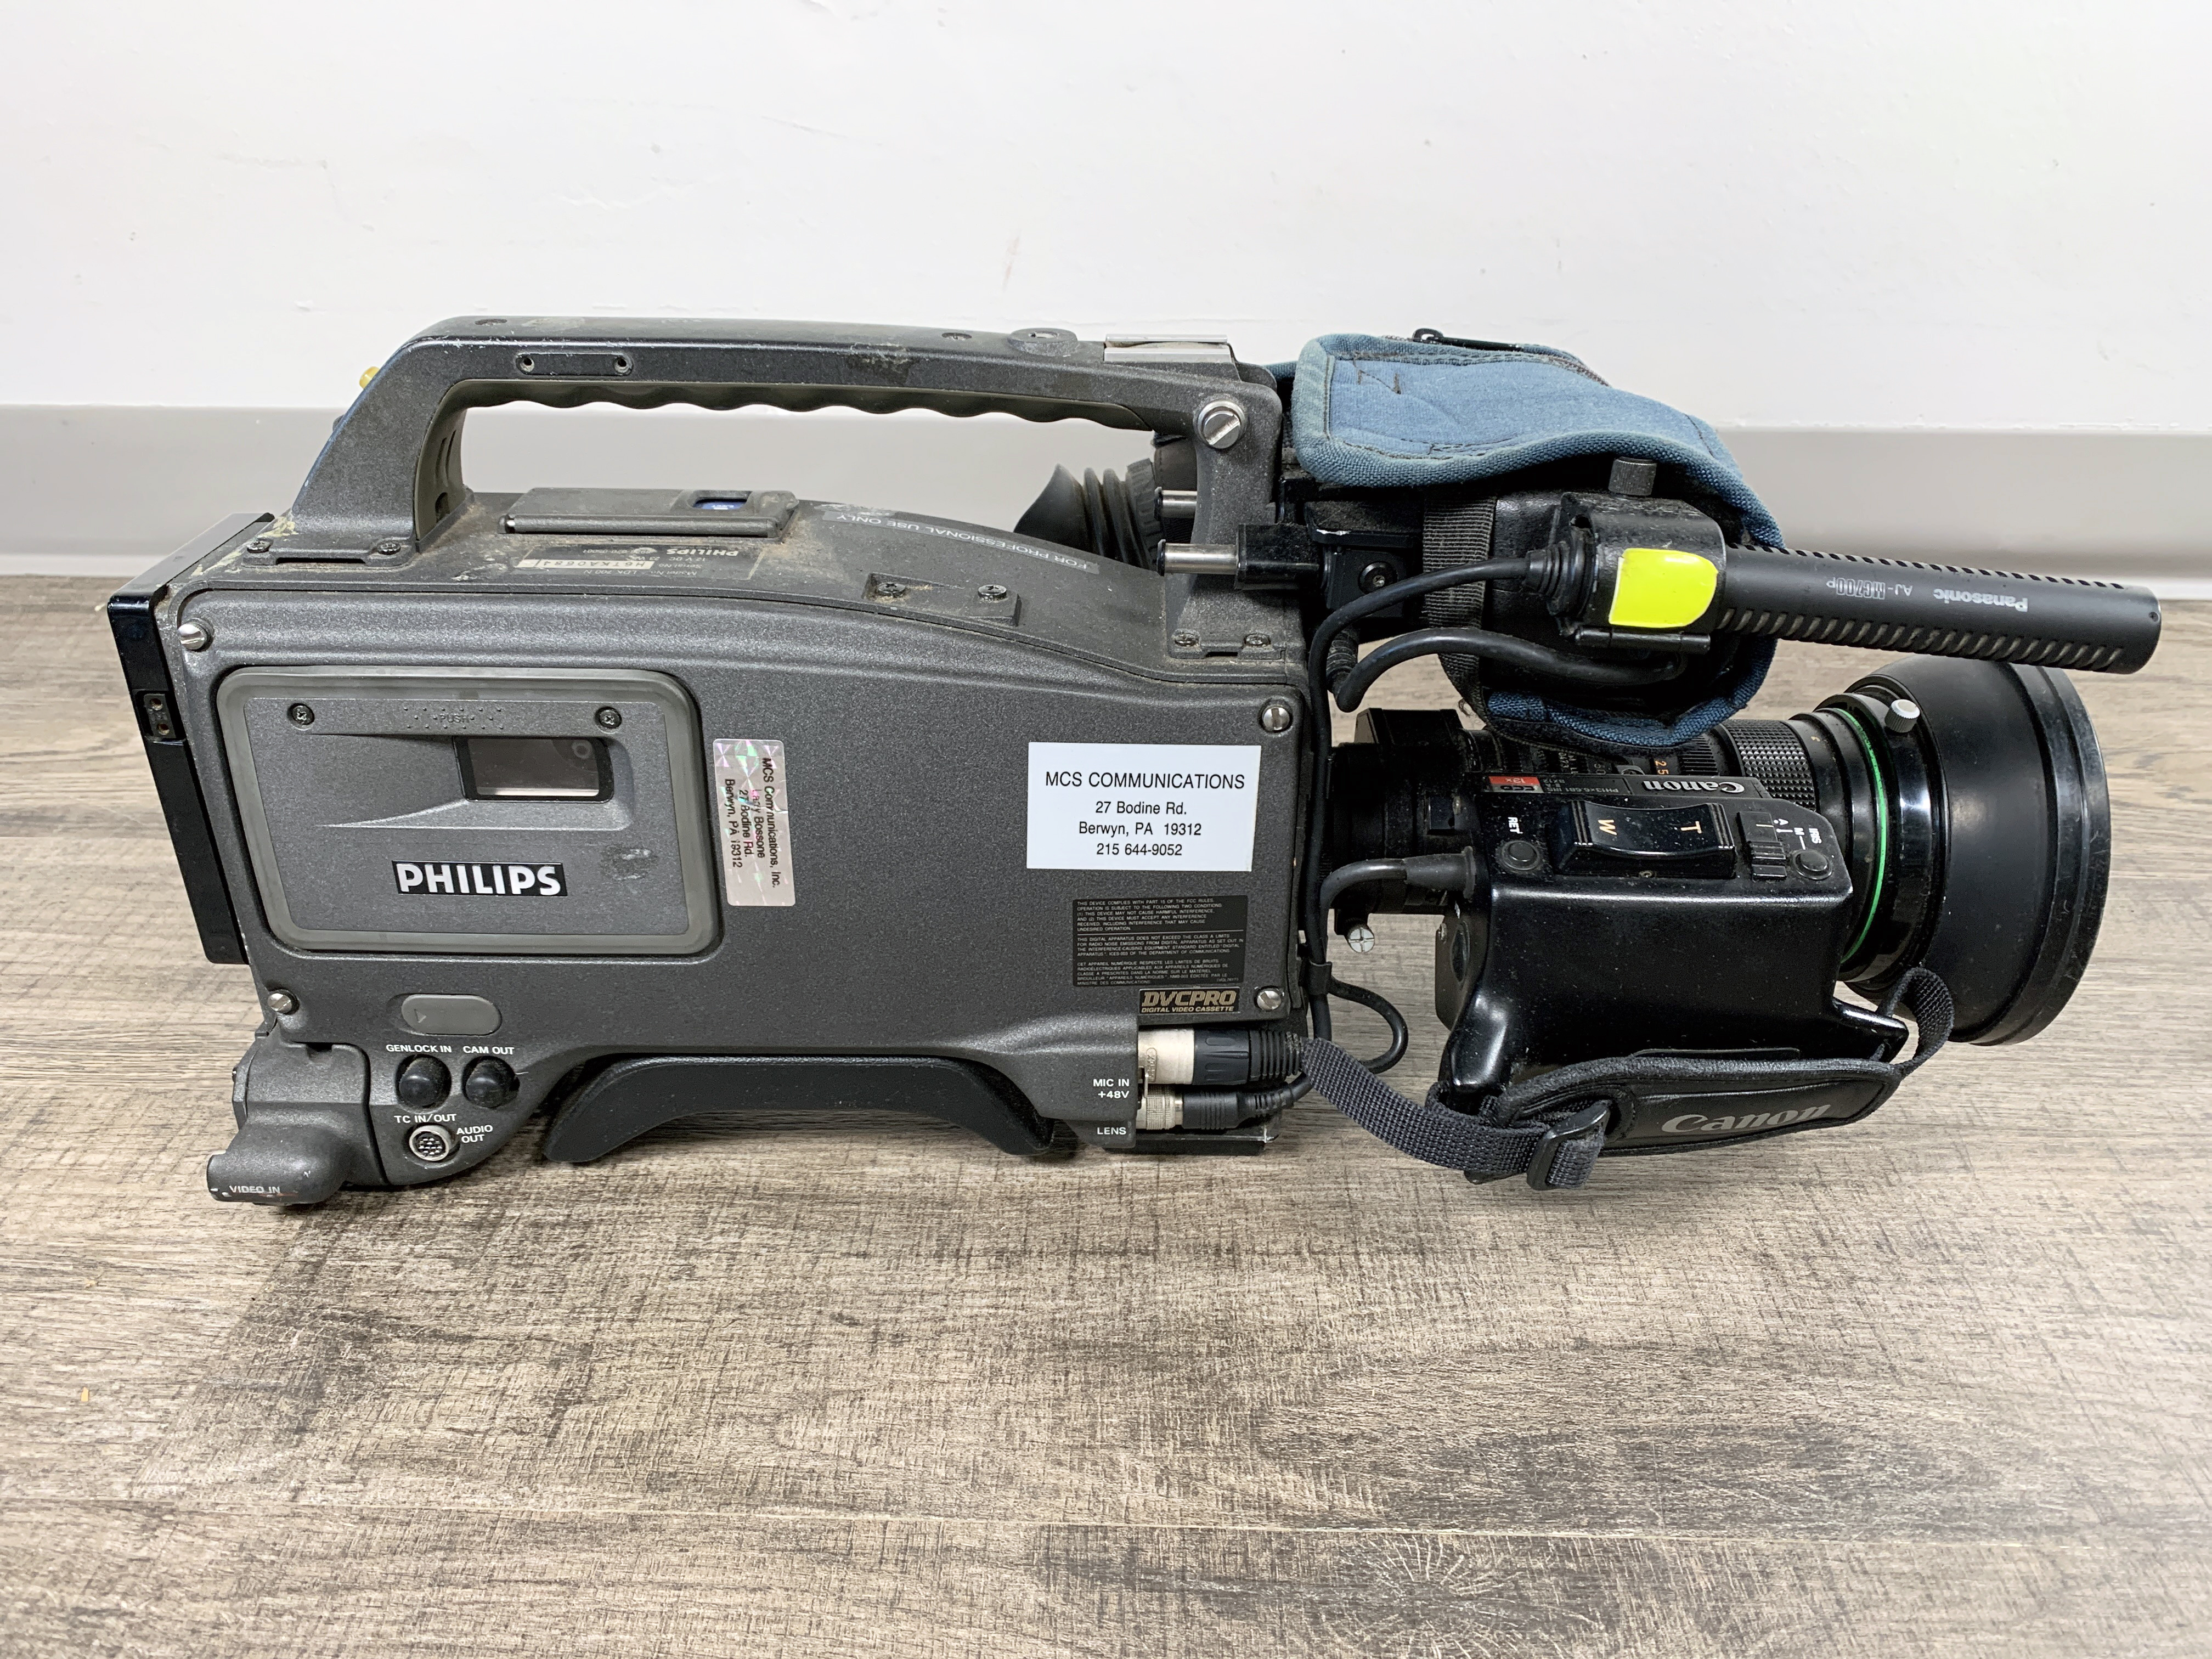 Phillips Digital Camcorder And Accessories image 3